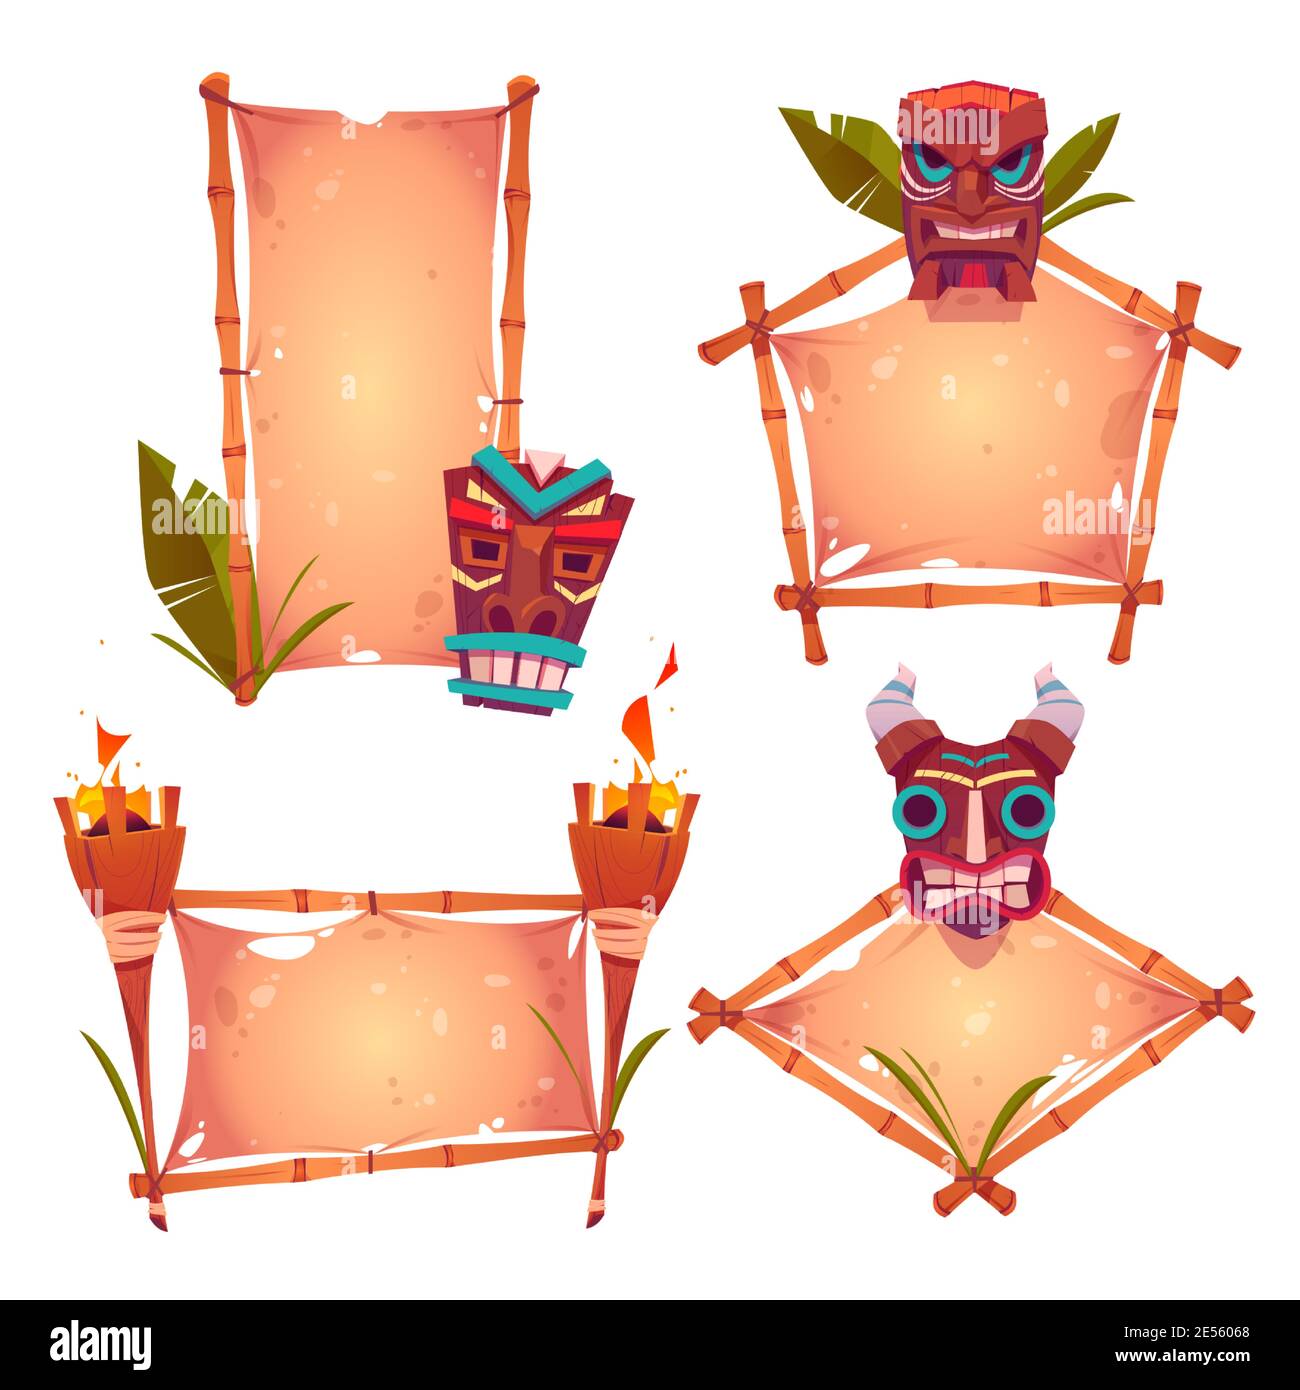 Bamboo frames with tiki masks, old parchment and burning torches, tribal wooden totems, hawaiian or polynesian style borders for hut bar signboard, Cartoon vector illustration, banners or posters set Stock Vector